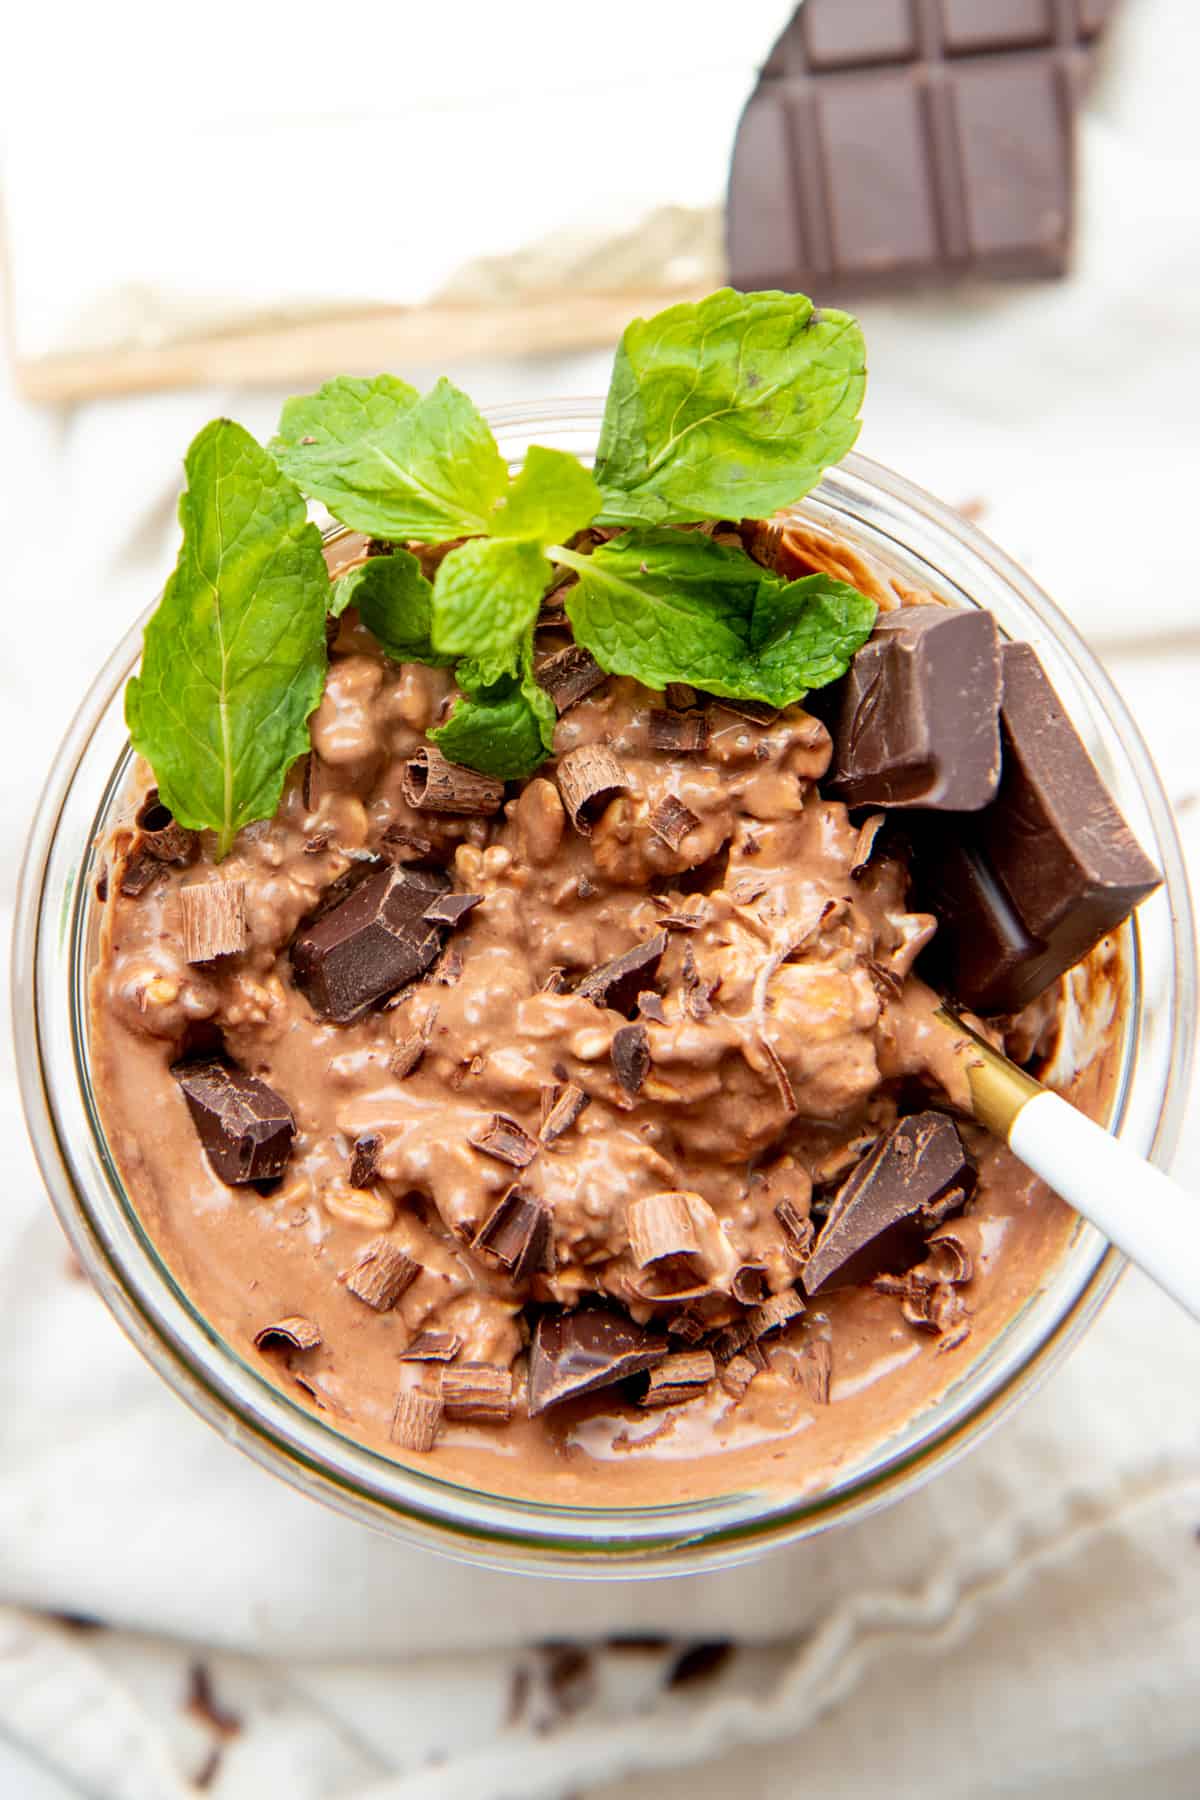 A spoon rests in a jar of overnight oats. Oats are topped with chopped chocolate and mint leaves.